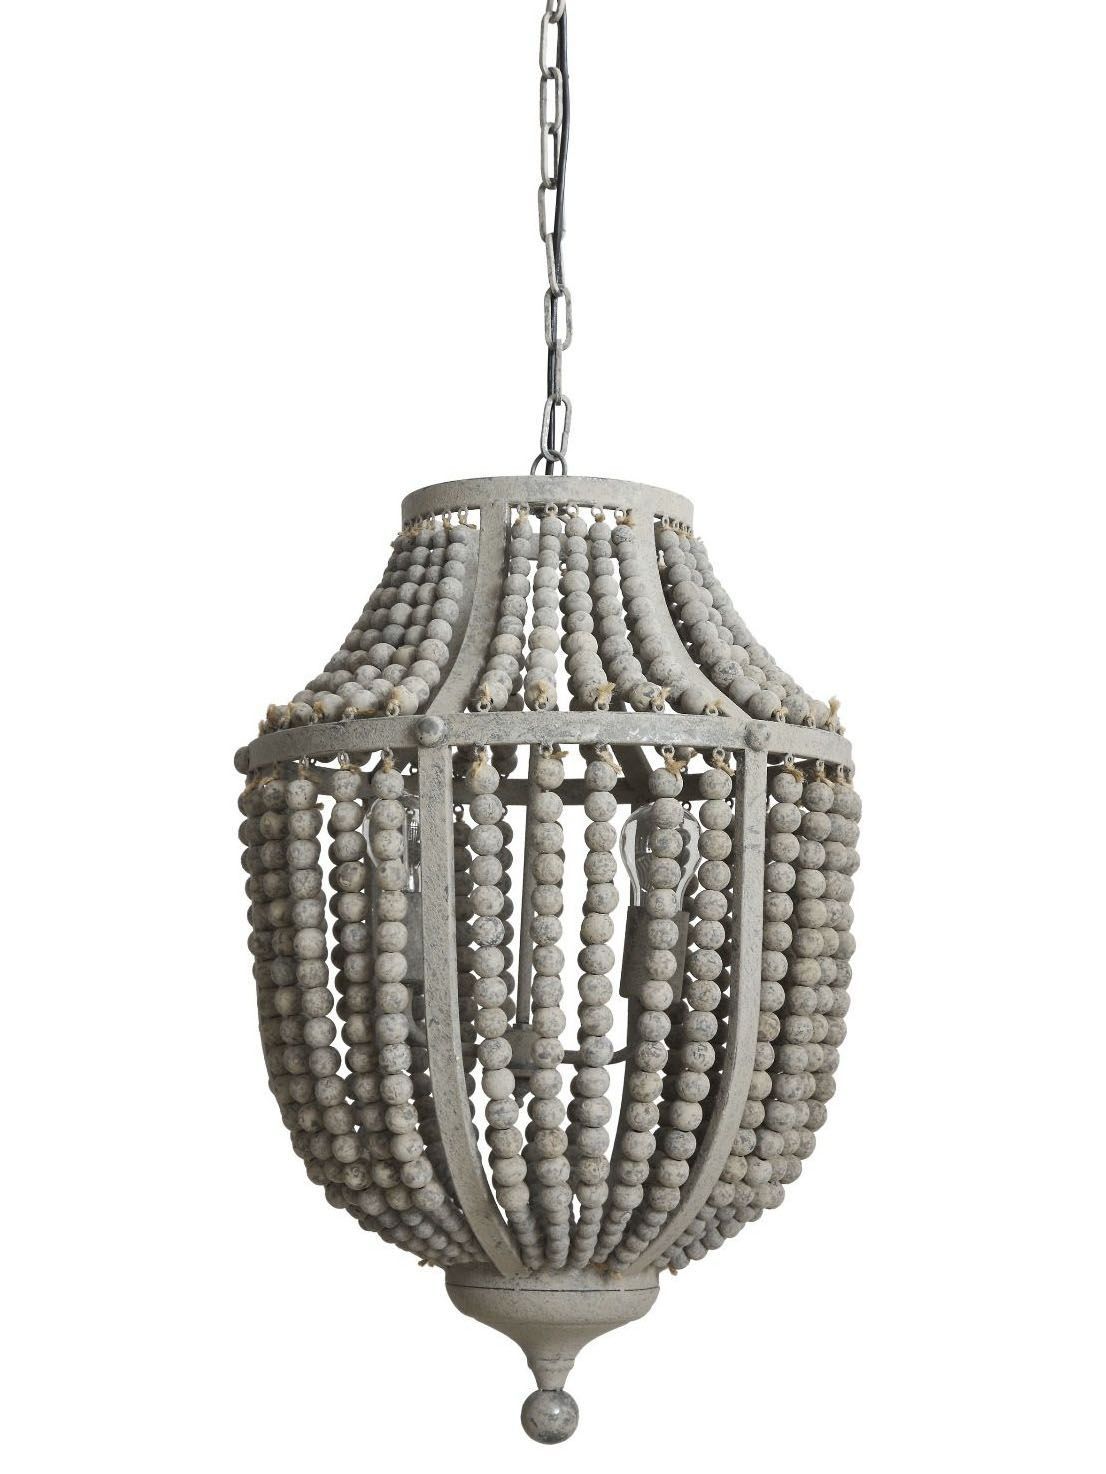 5 Fun Places To Hang A Chandelier | Bedroom | Wood Bead Pertaining To Nehemiah 3 Light Empire Chandeliers (View 27 of 30)